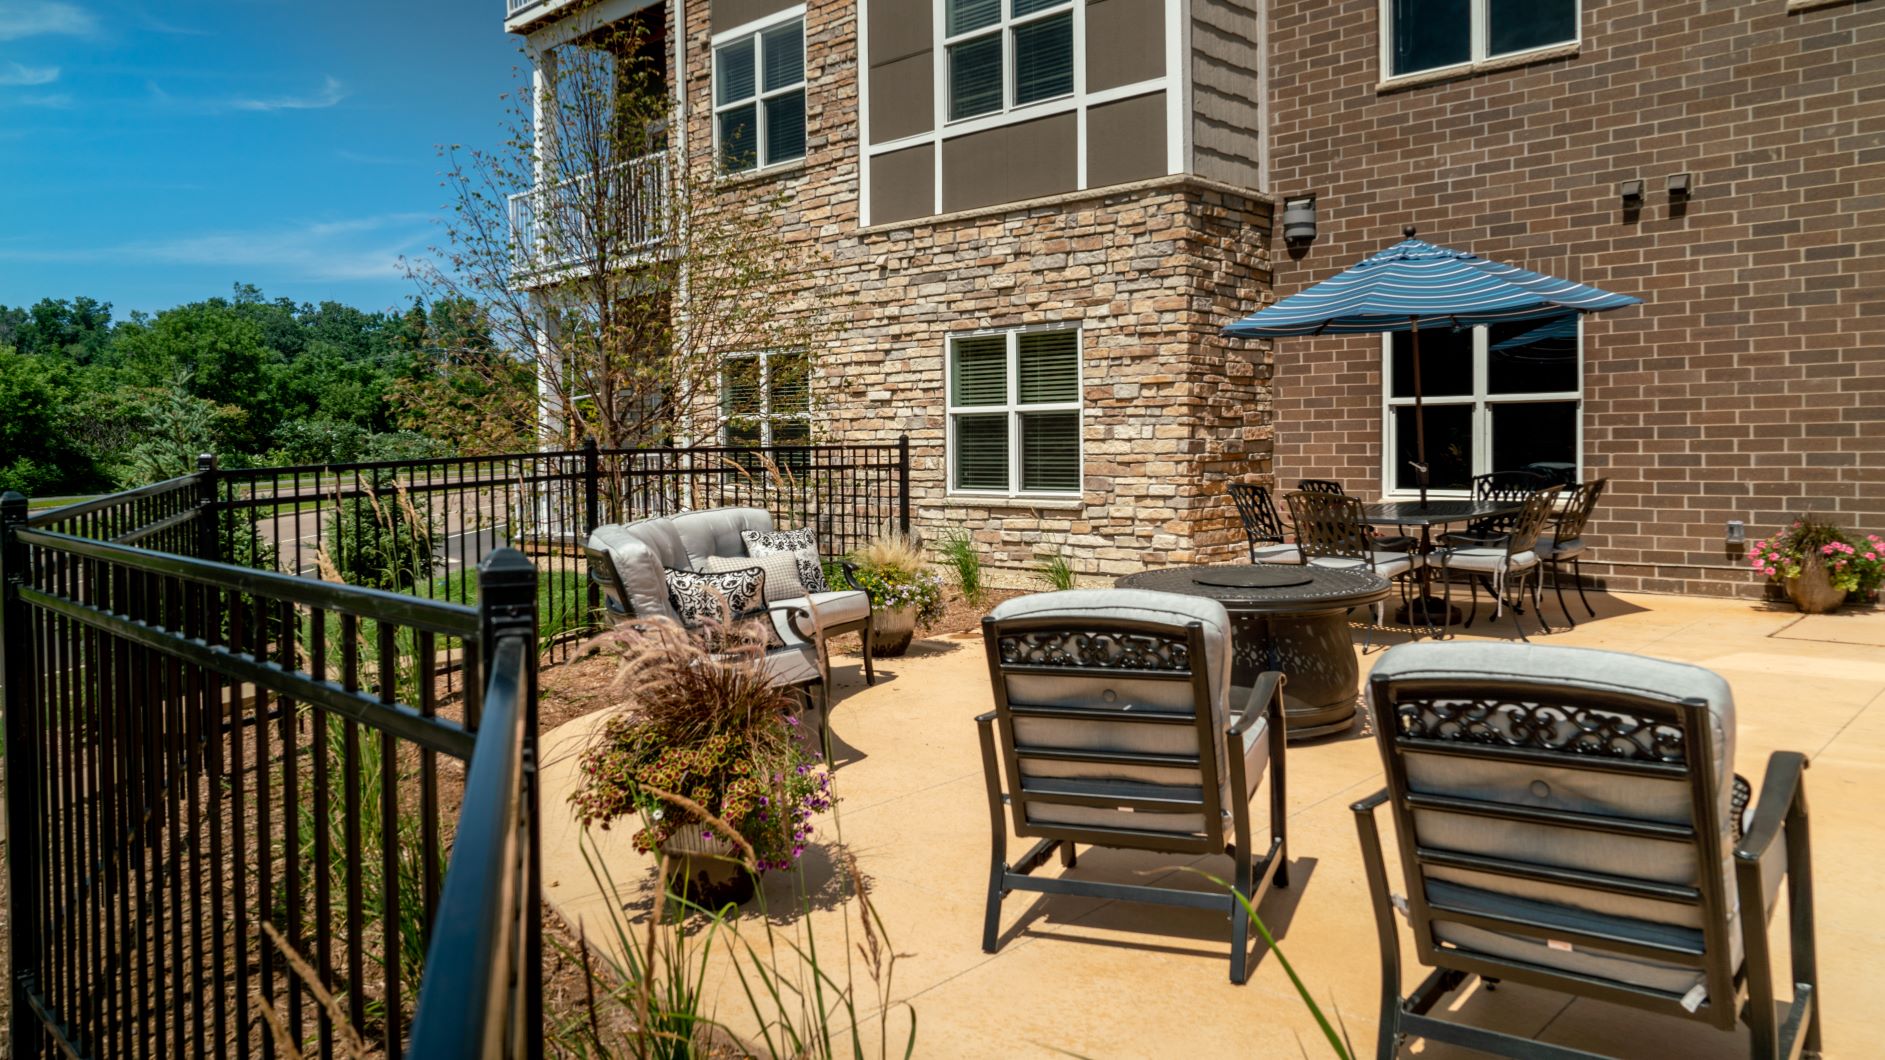 Prairie Bluffs is designed to provide you with a worry-free, enriching lifestyle. In addition to our apartments, many of which are outfitted with a full kitchen, washers and dryers, and decks or patios, our pet-friendly community offers a variety of amenities